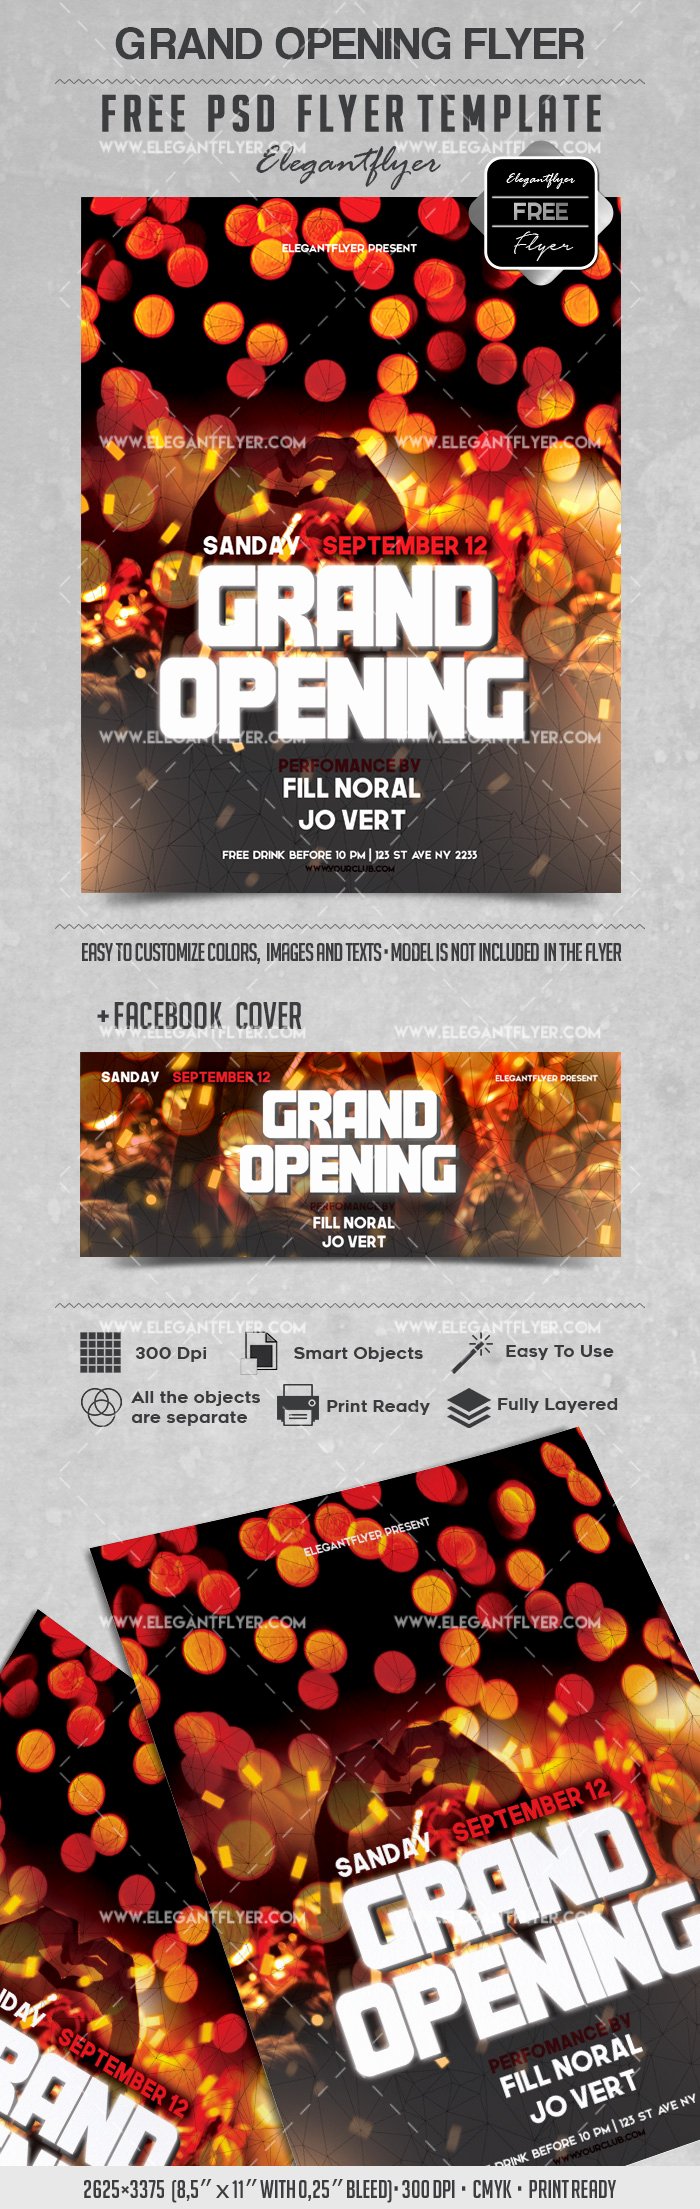 Grand Opening Flyer Template New Party for Grand Opening Lights Template – by Elegantflyer